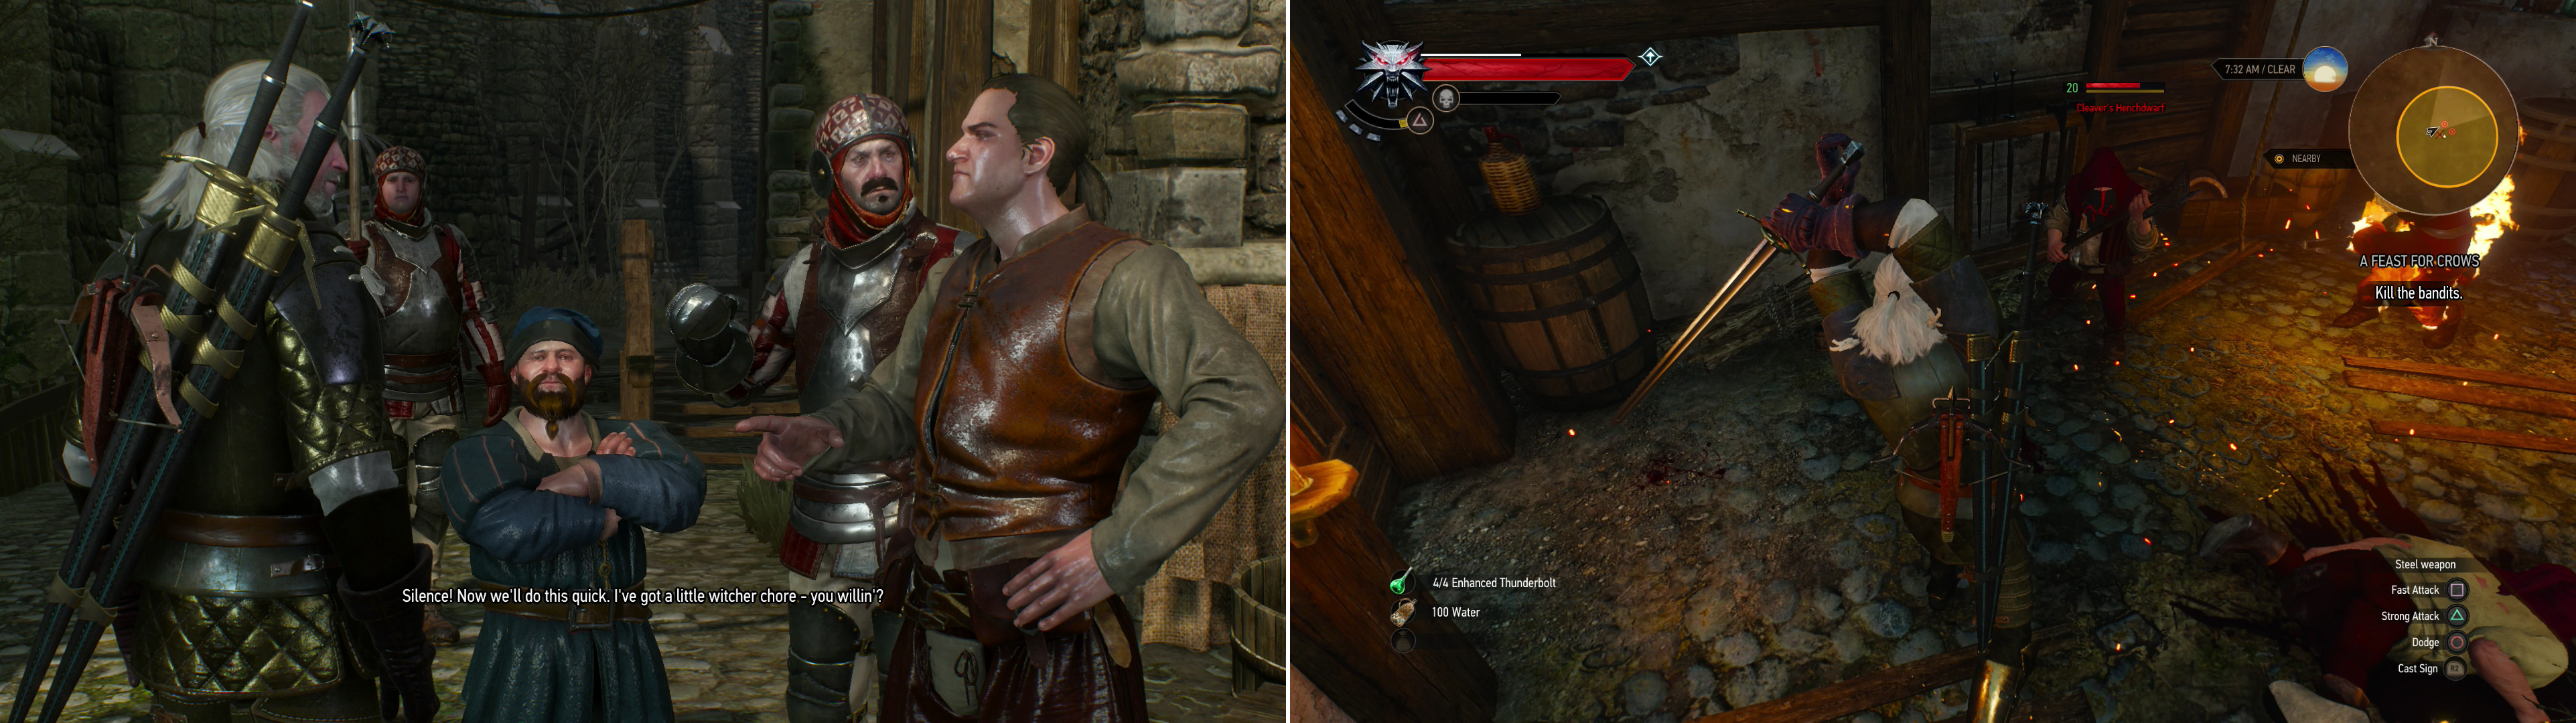 Somebody let a monster loose in a warehouse. Seems like work for a Witcher (left). Defeat Cleaver's henchmen to claim their treasure (right).